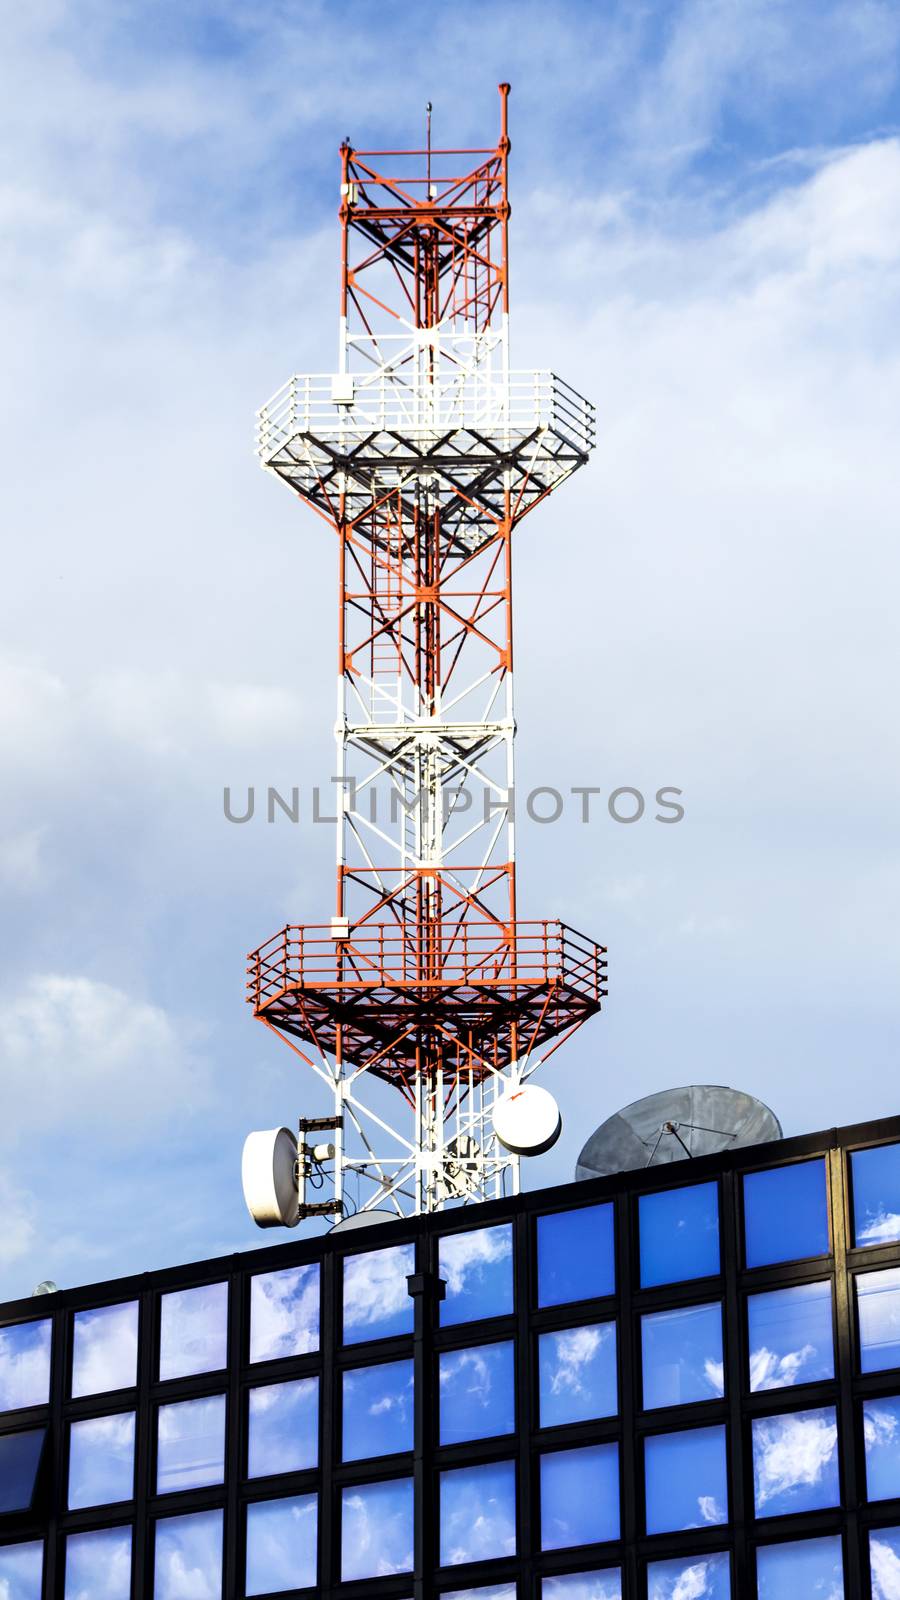 Antena on the building that reflects sky and clouds